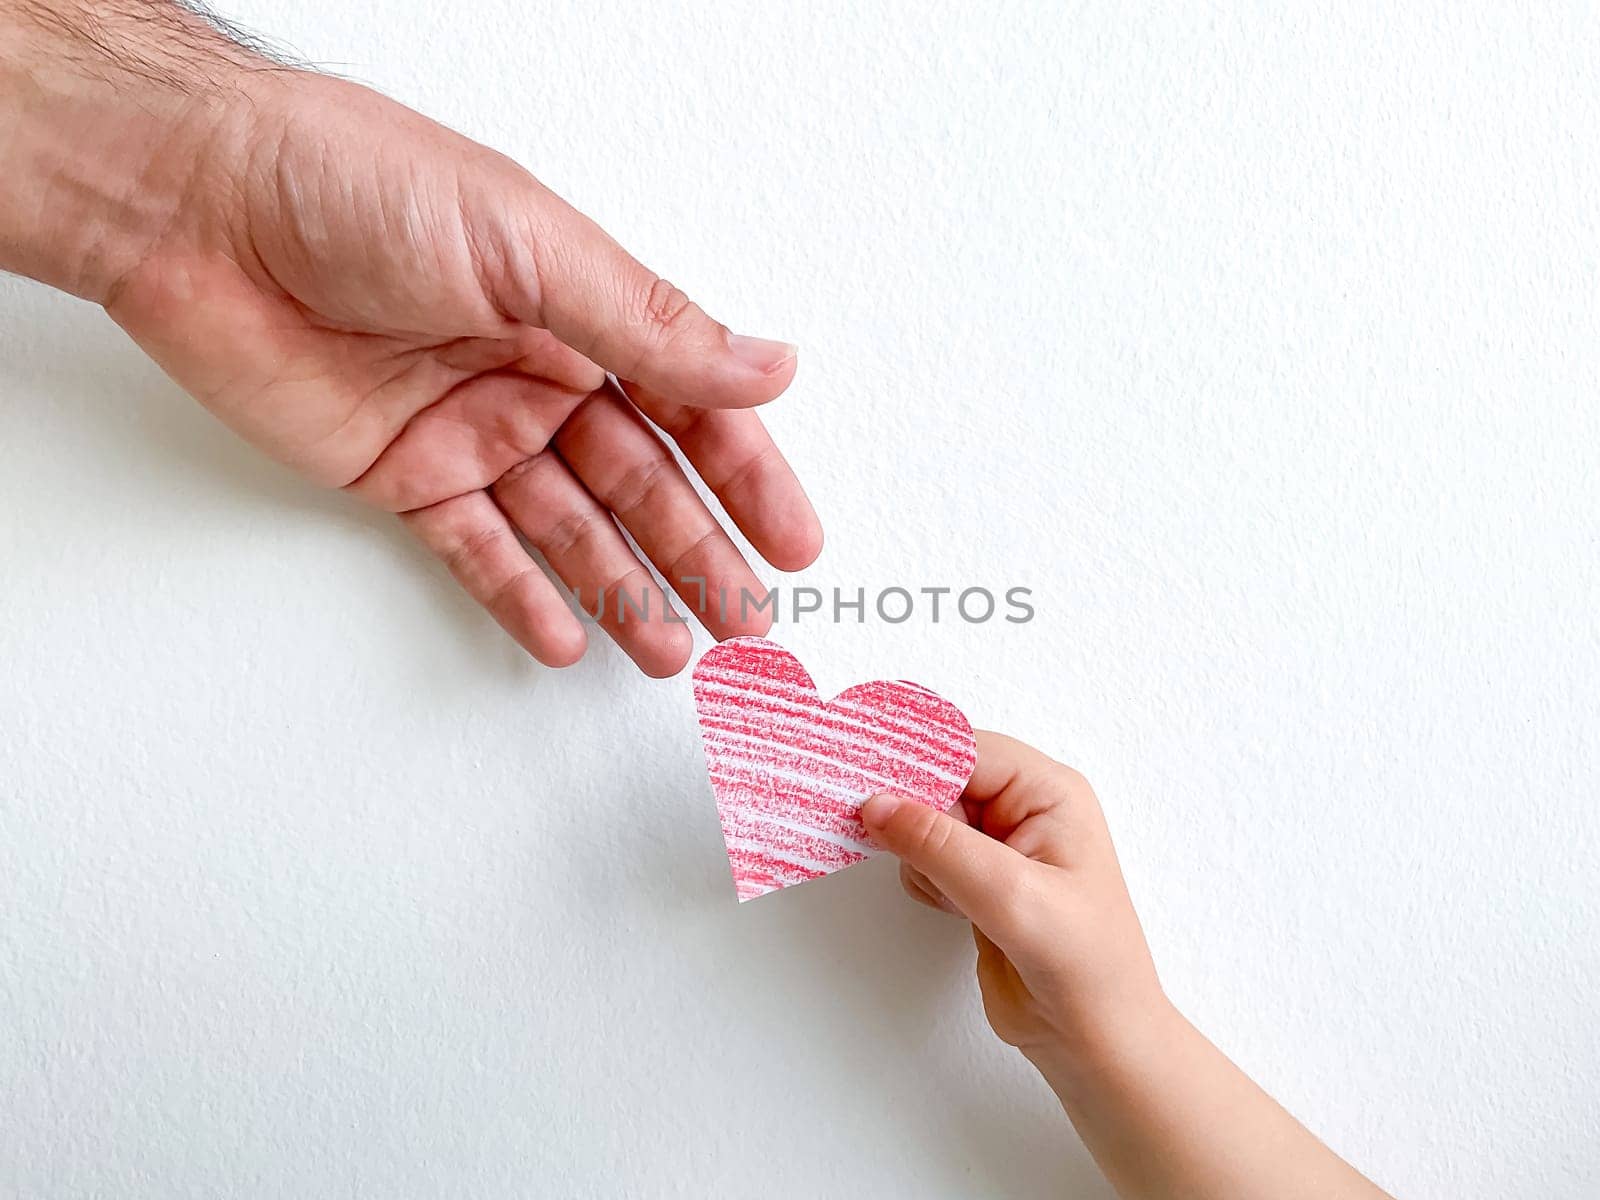 Adult hand giving striped pink paper heart to childs hand, concept of love, care, and family bonding with copy space. Can be utilized for materials about parenting, child development, and family relationships. It is ideal for use in educational contexts, social services, and psychology resources. High quality photo